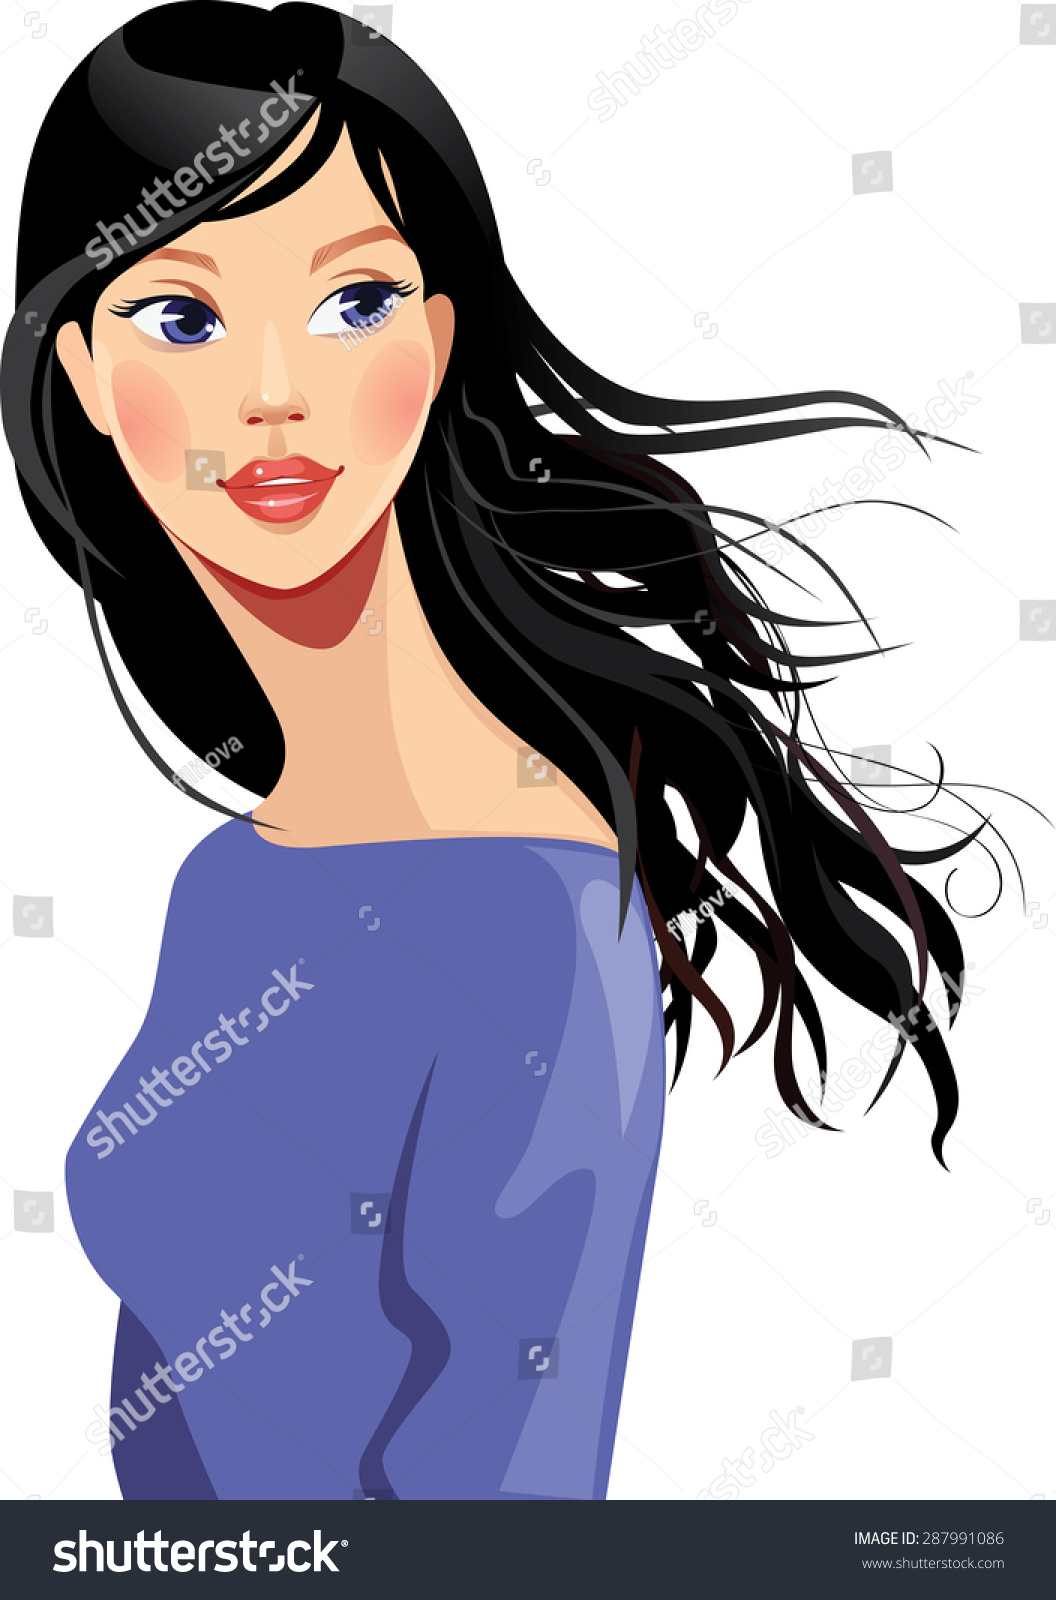 clipart girl with long hair - photo #16